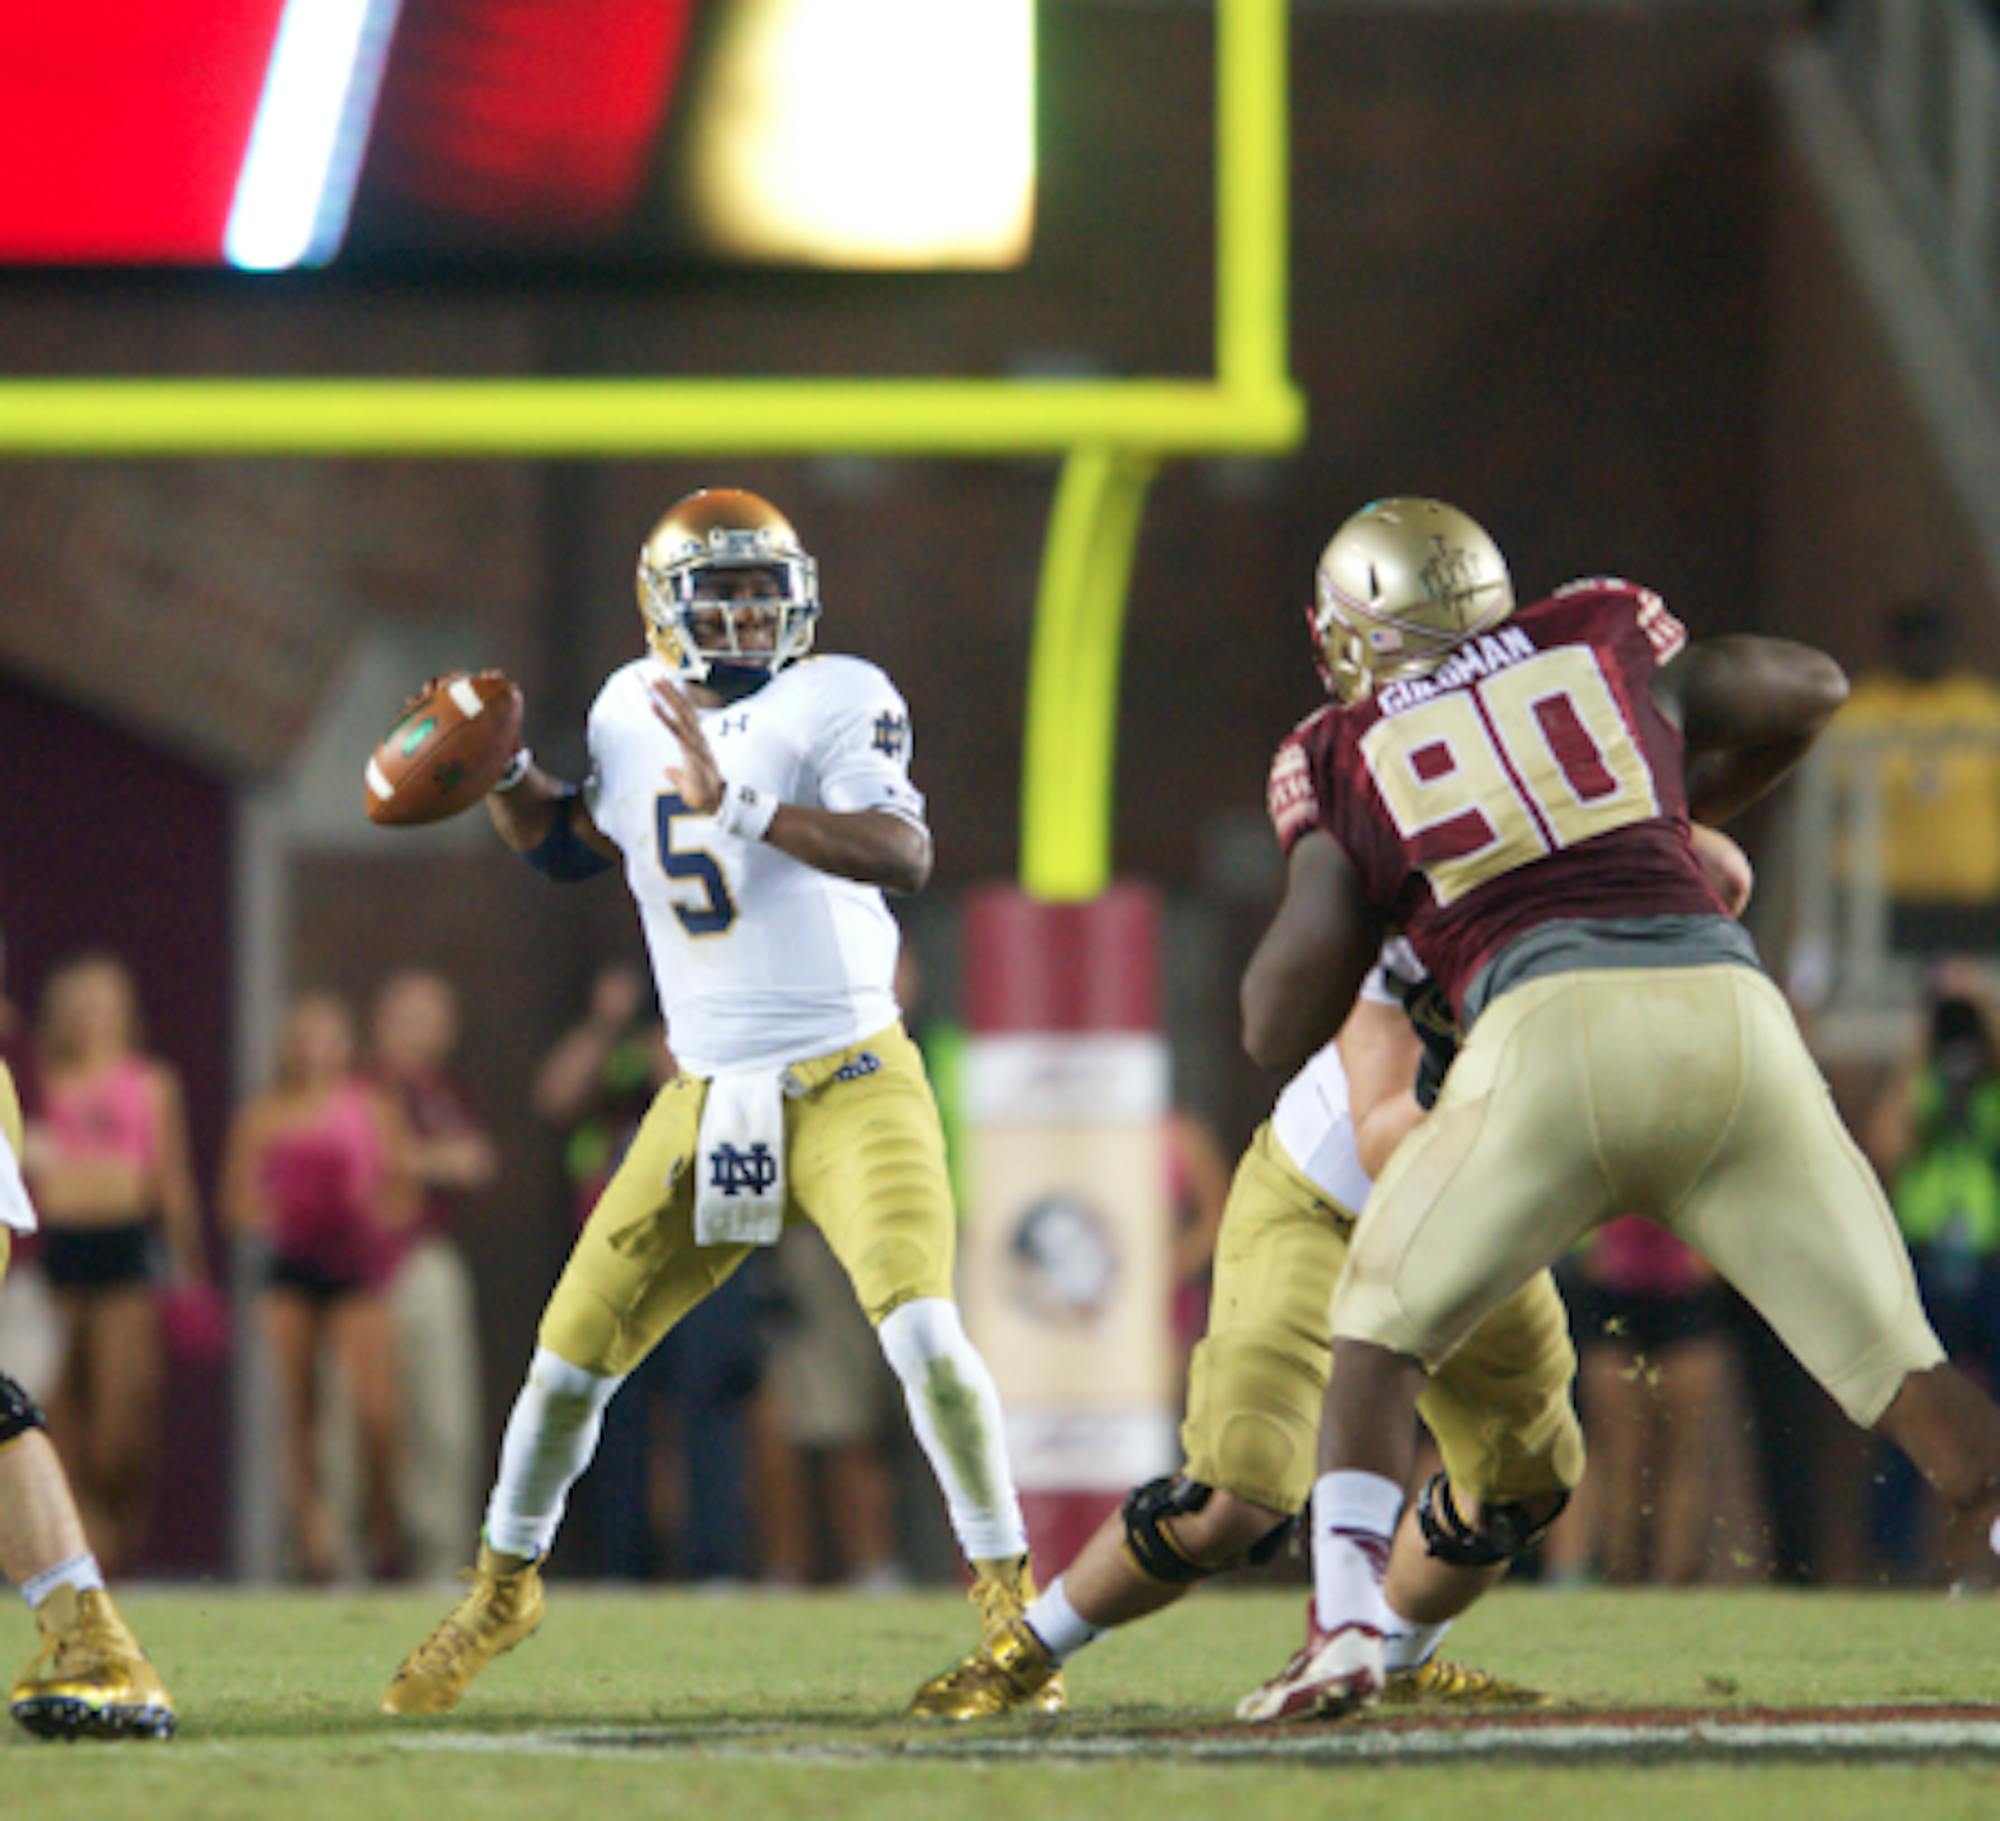 Golson throws against Florida State on Oct. 18 in Tallahassee, Florida.